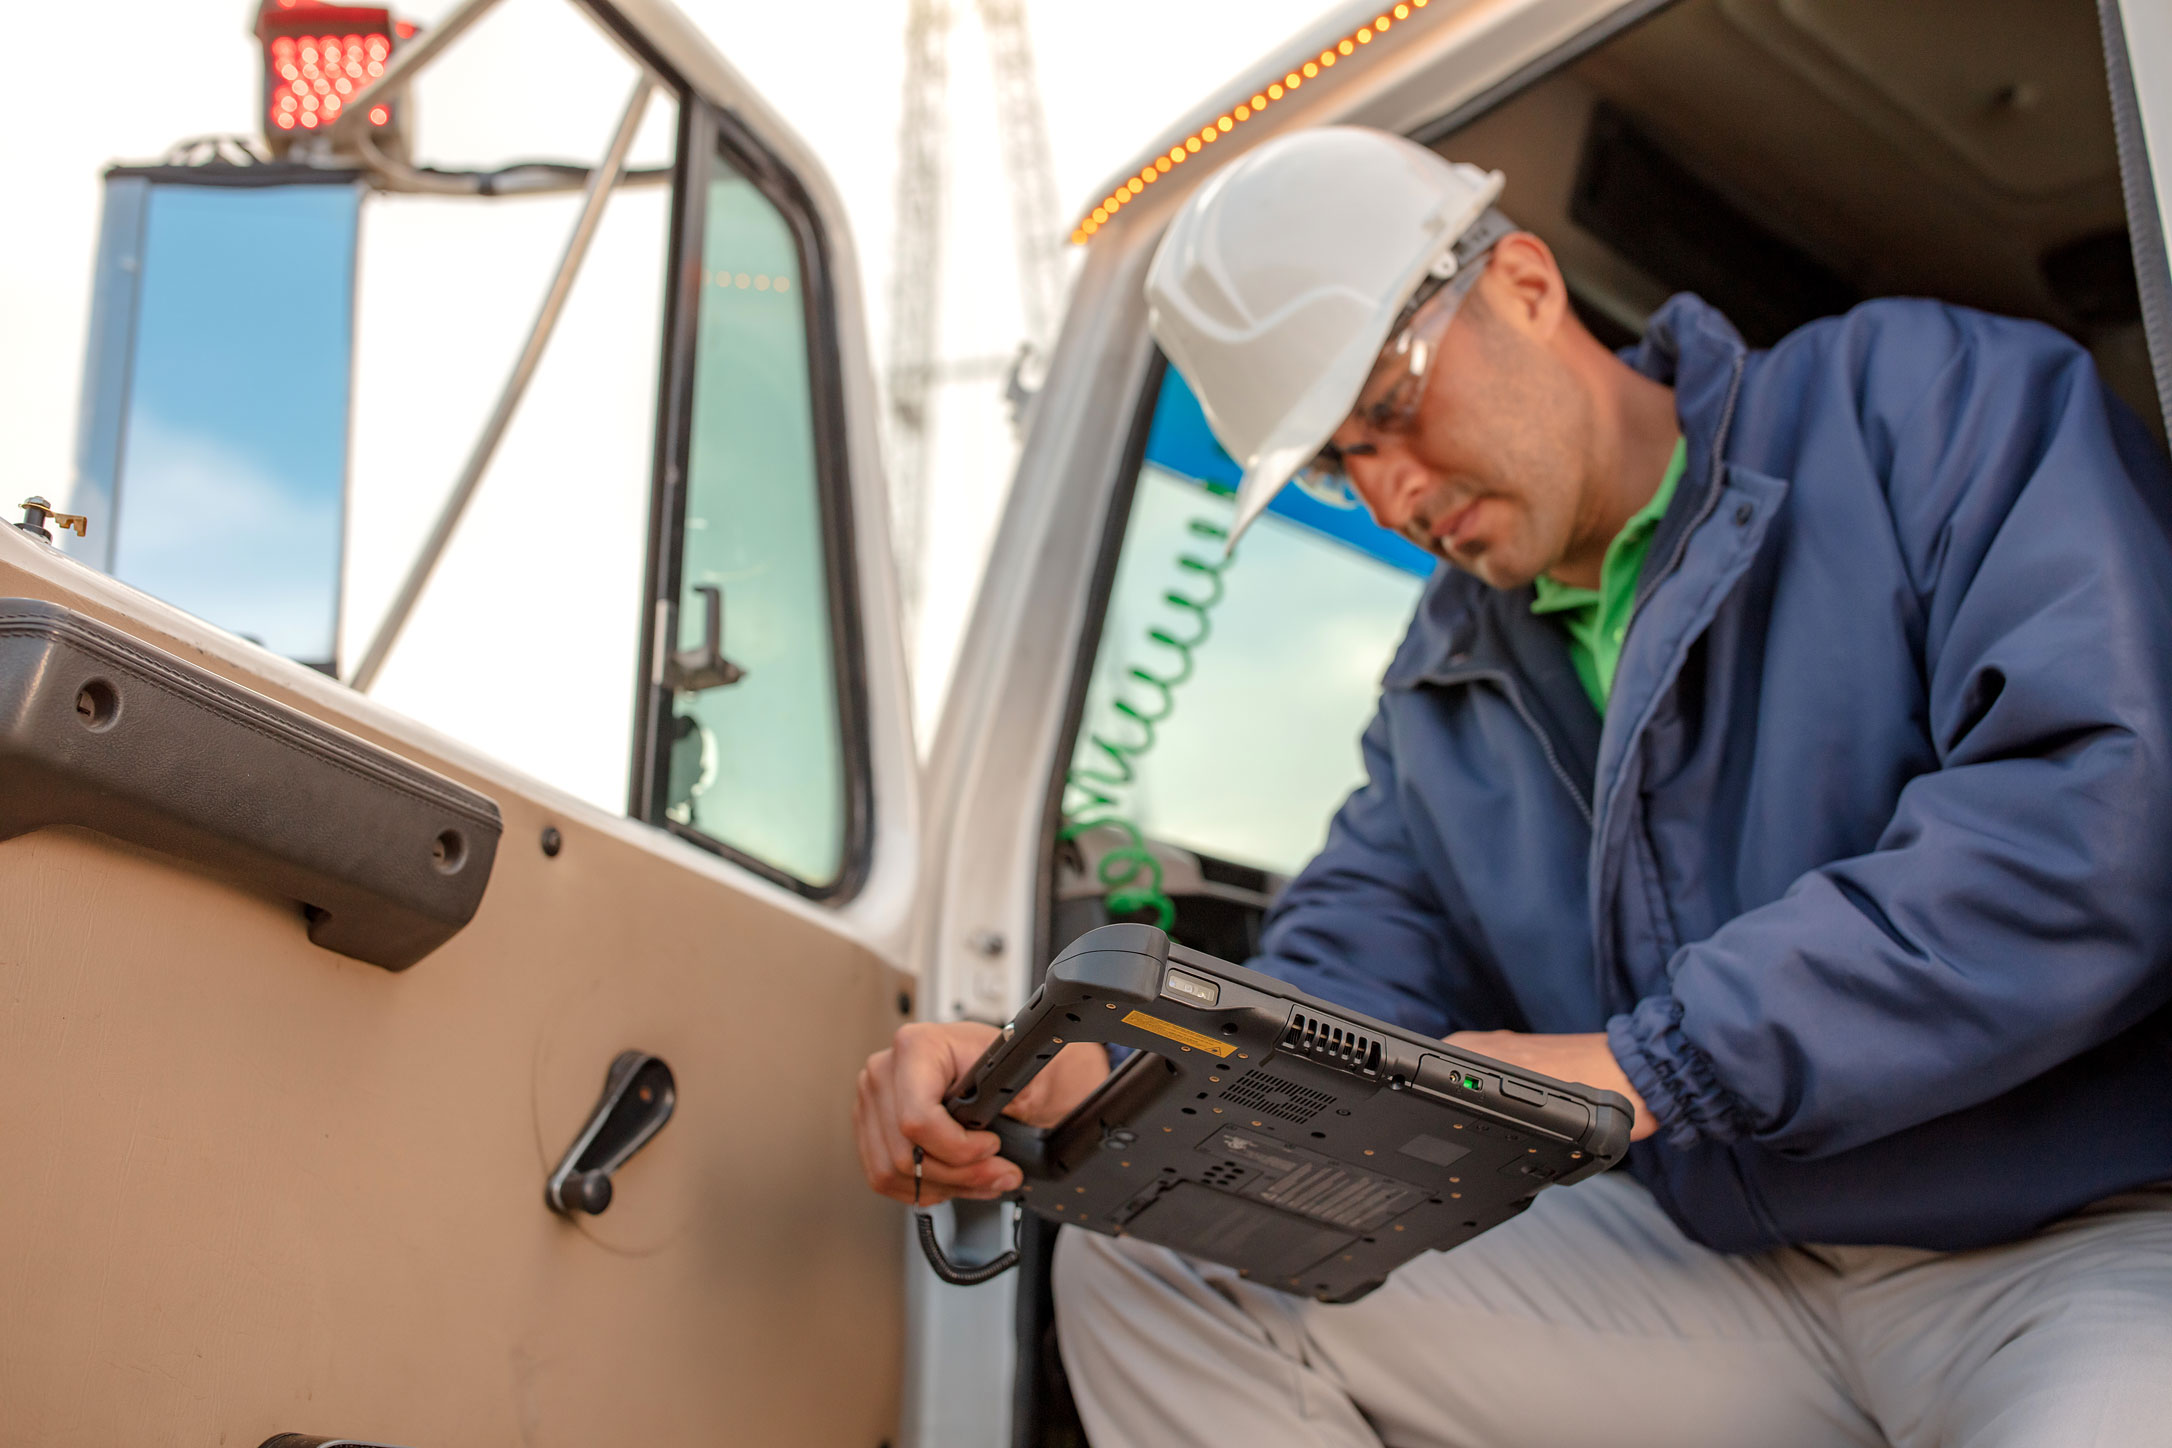 Nuffield software development on a Zebra rugged tablet used by an electrical worker getting out of a truck